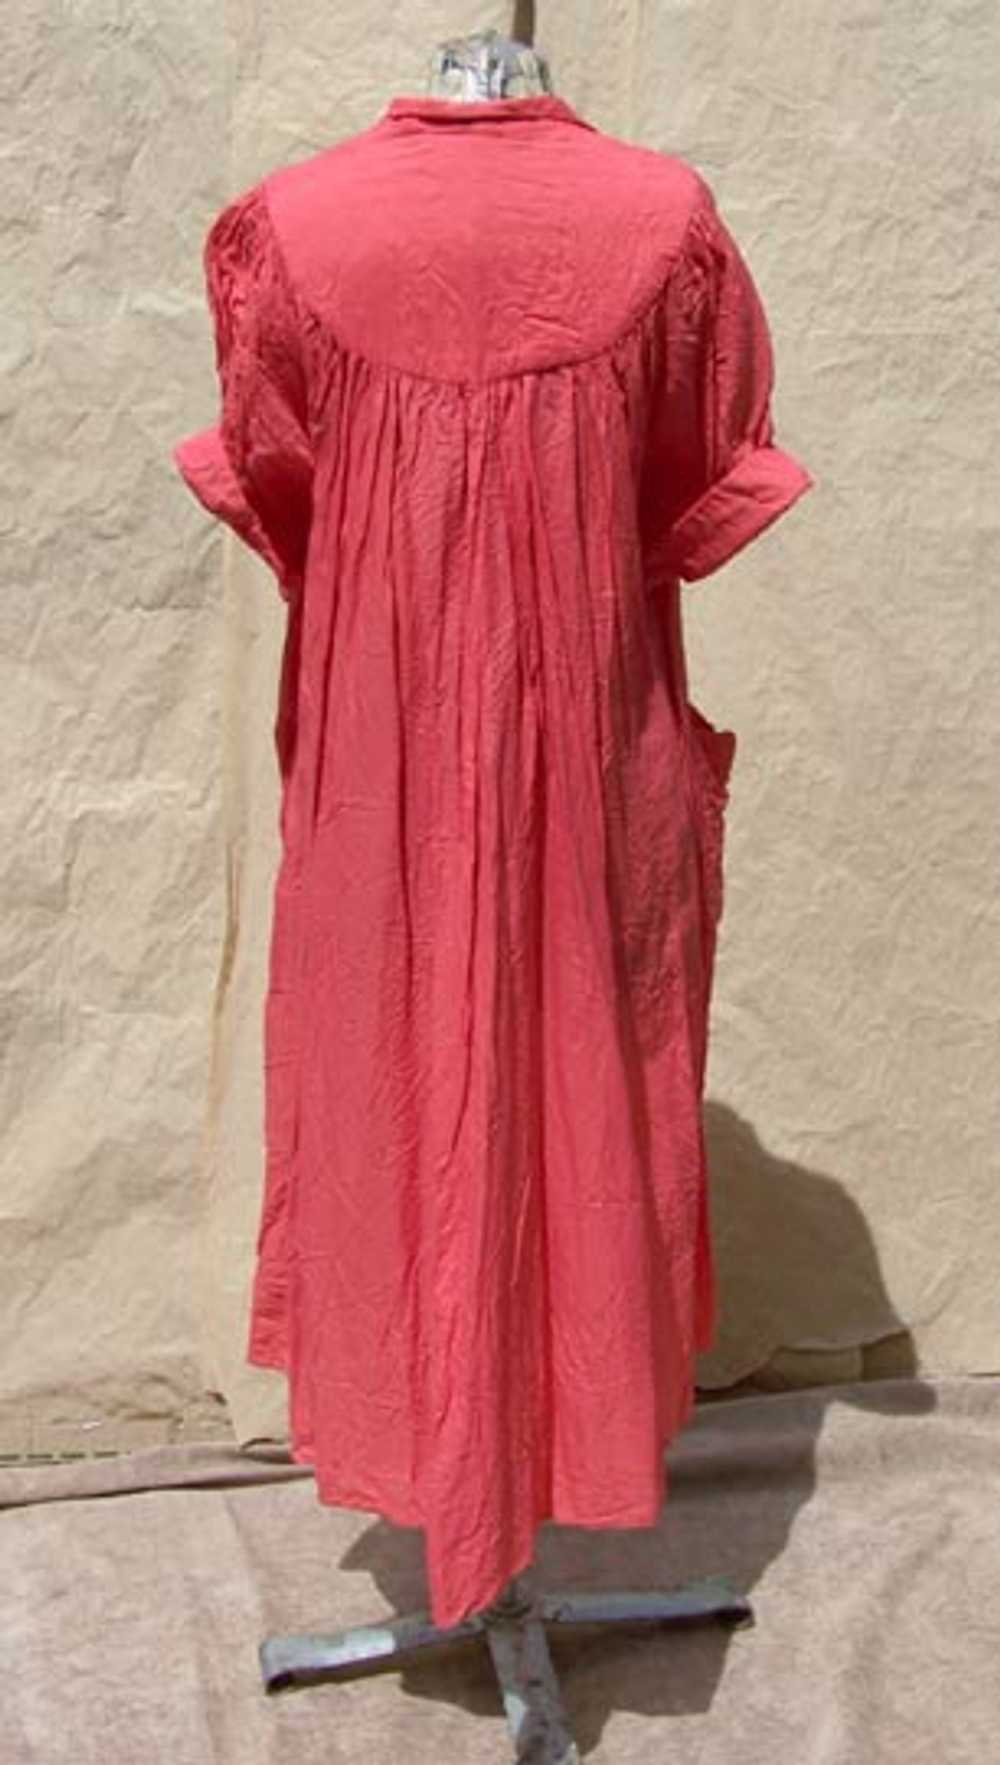 Romantic quilted housecoat - image 6